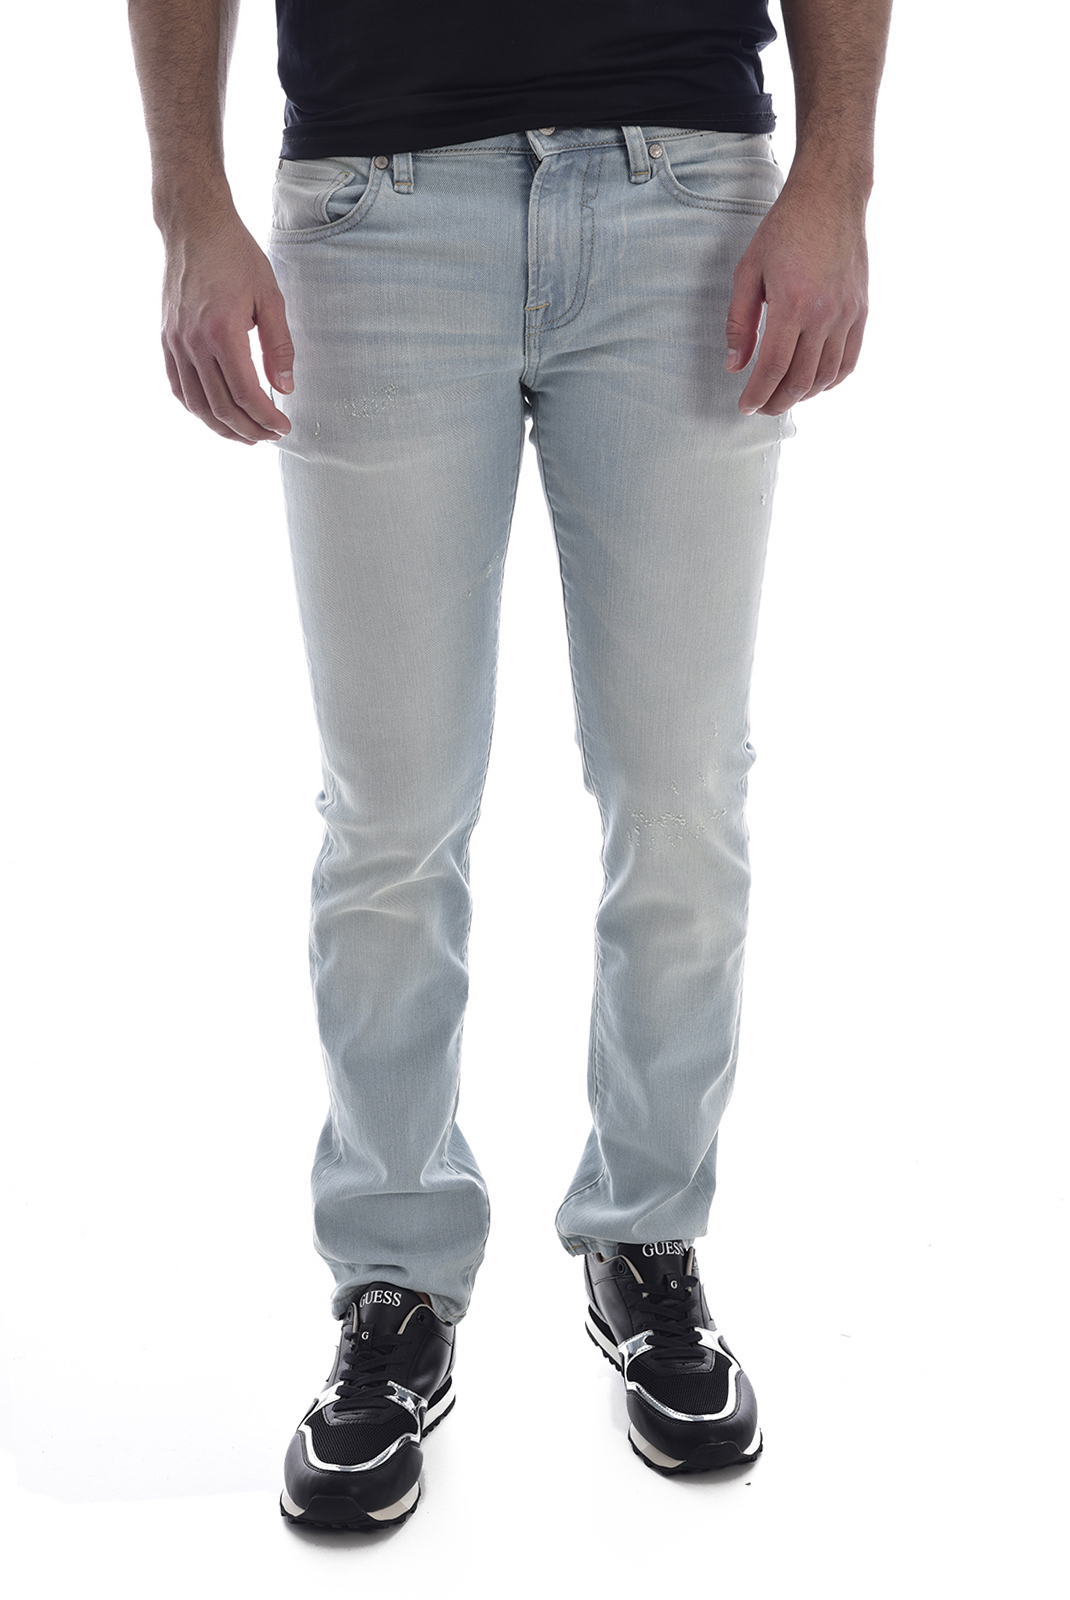 Jeans bleu skinny taille basse homme - Guess M92an2